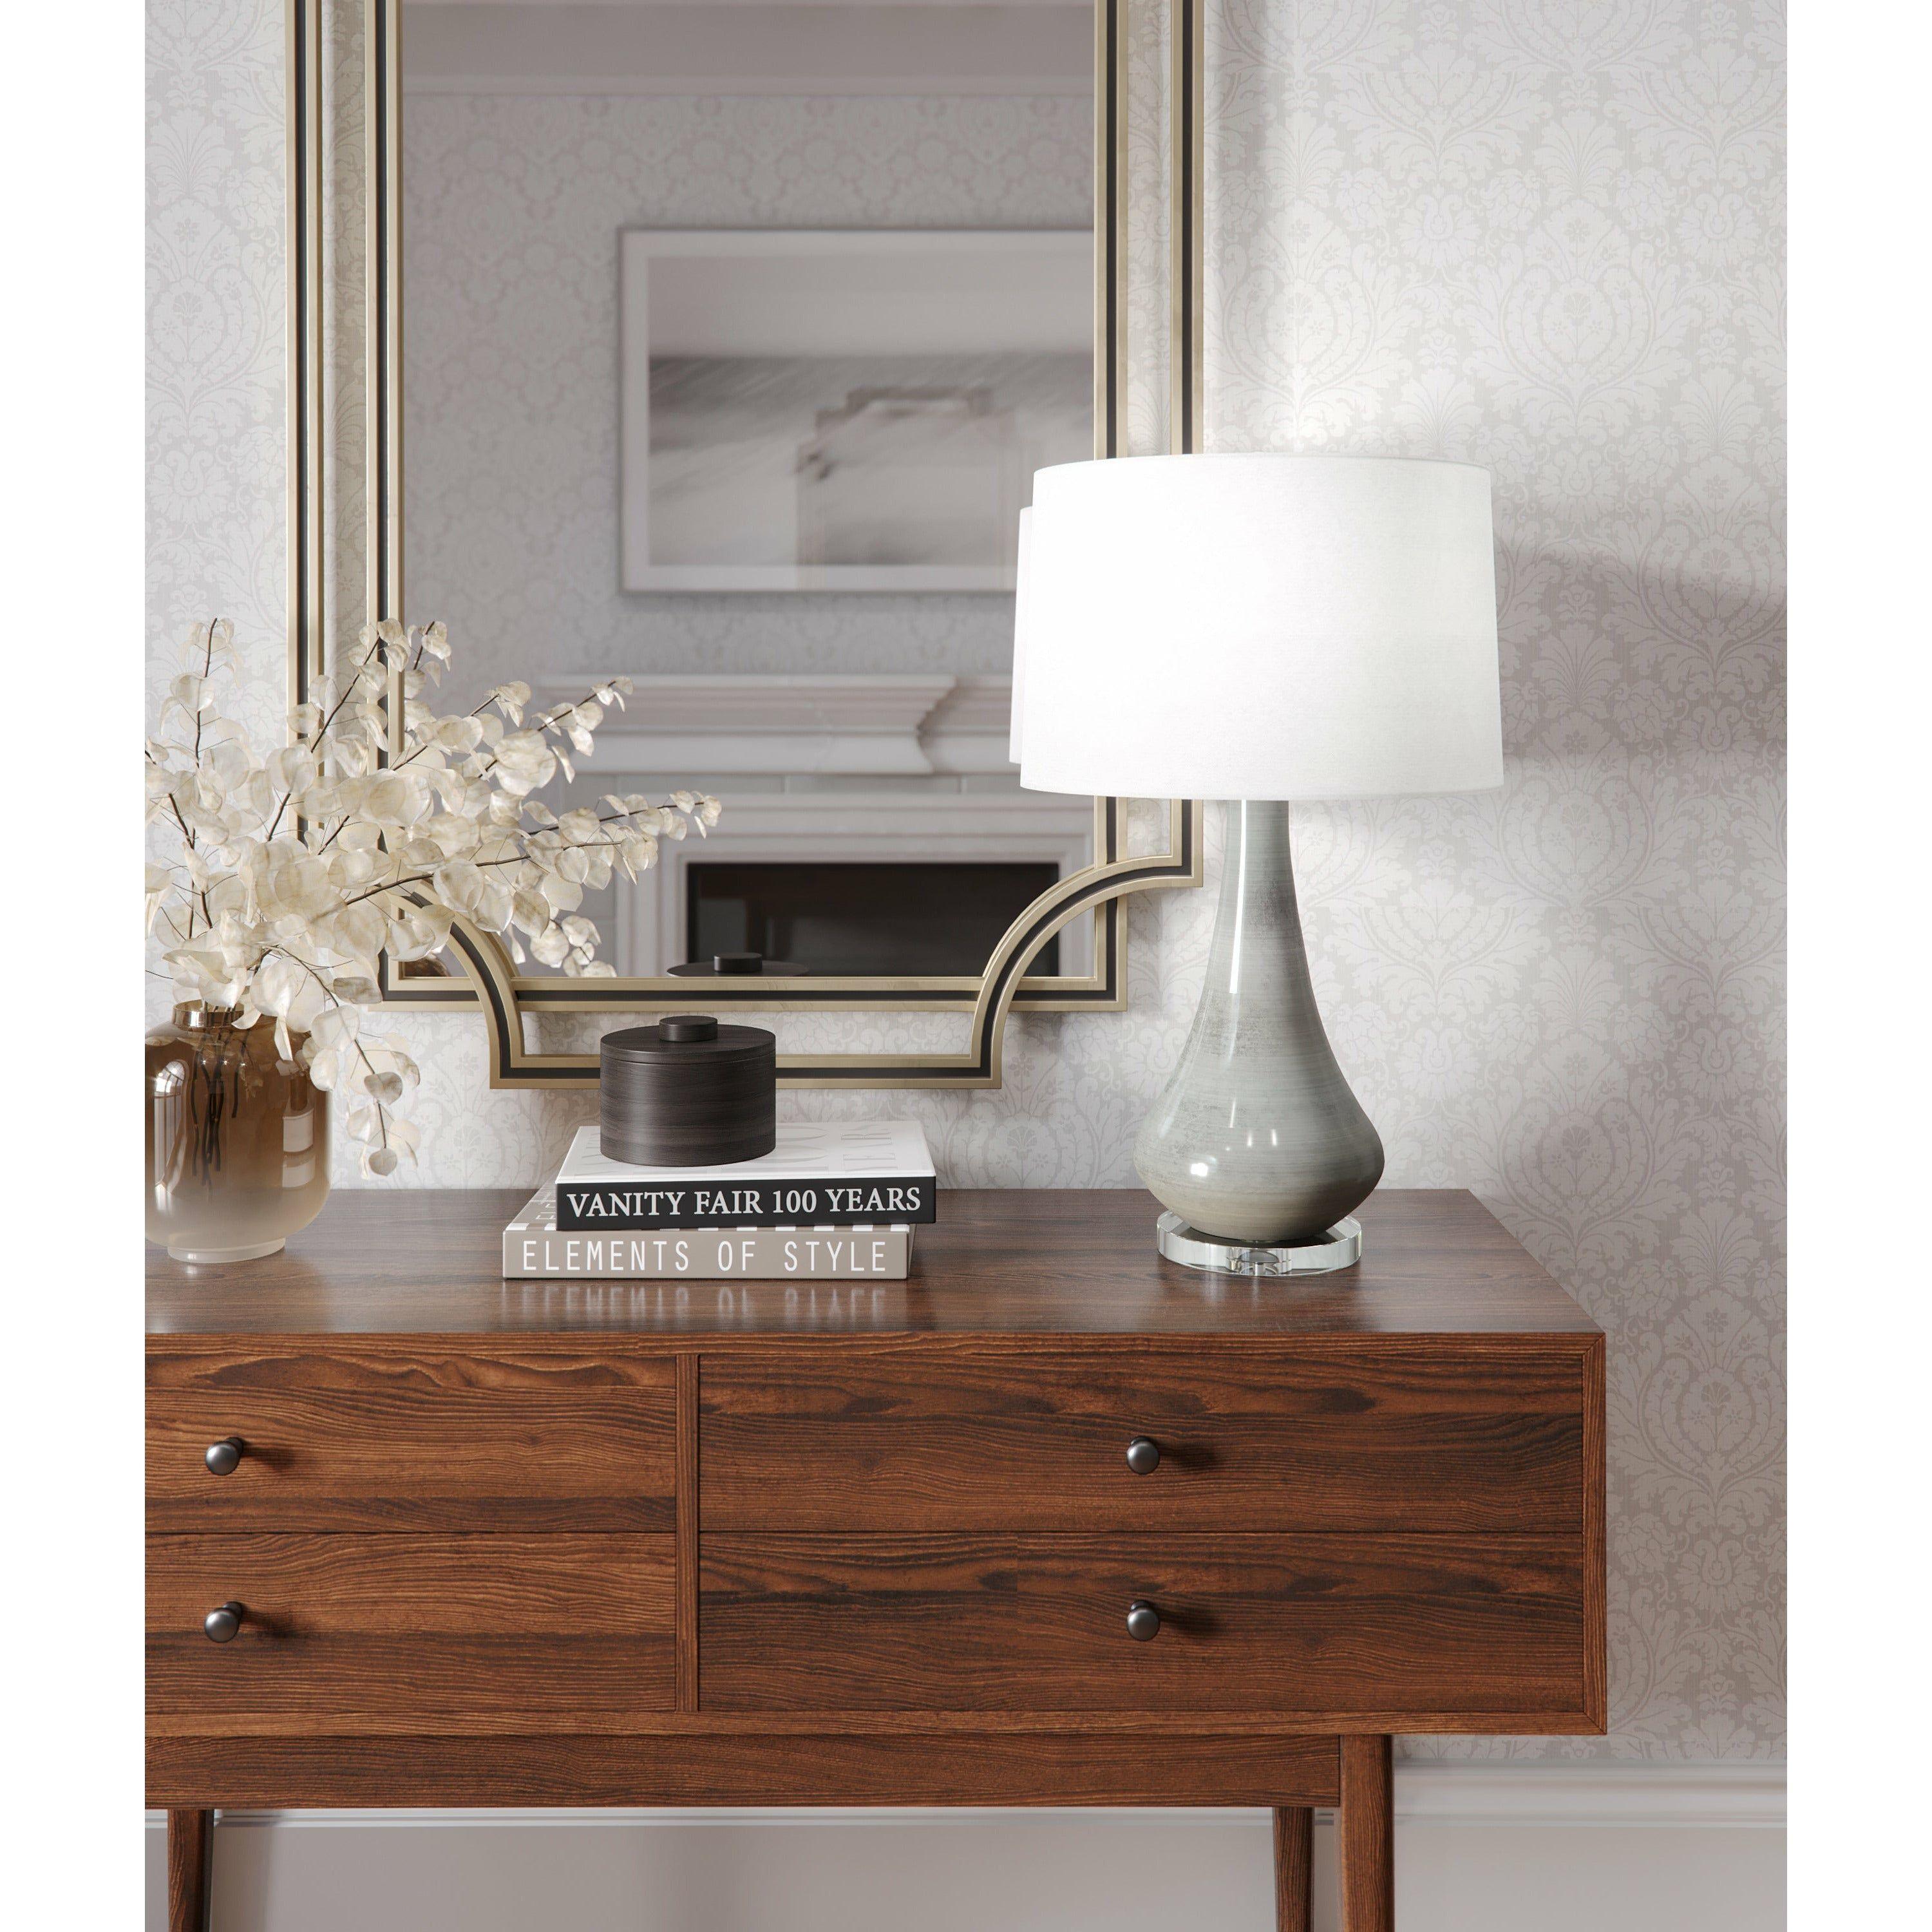 Flow Decor - Orwell Table Lamp - Lights Canada